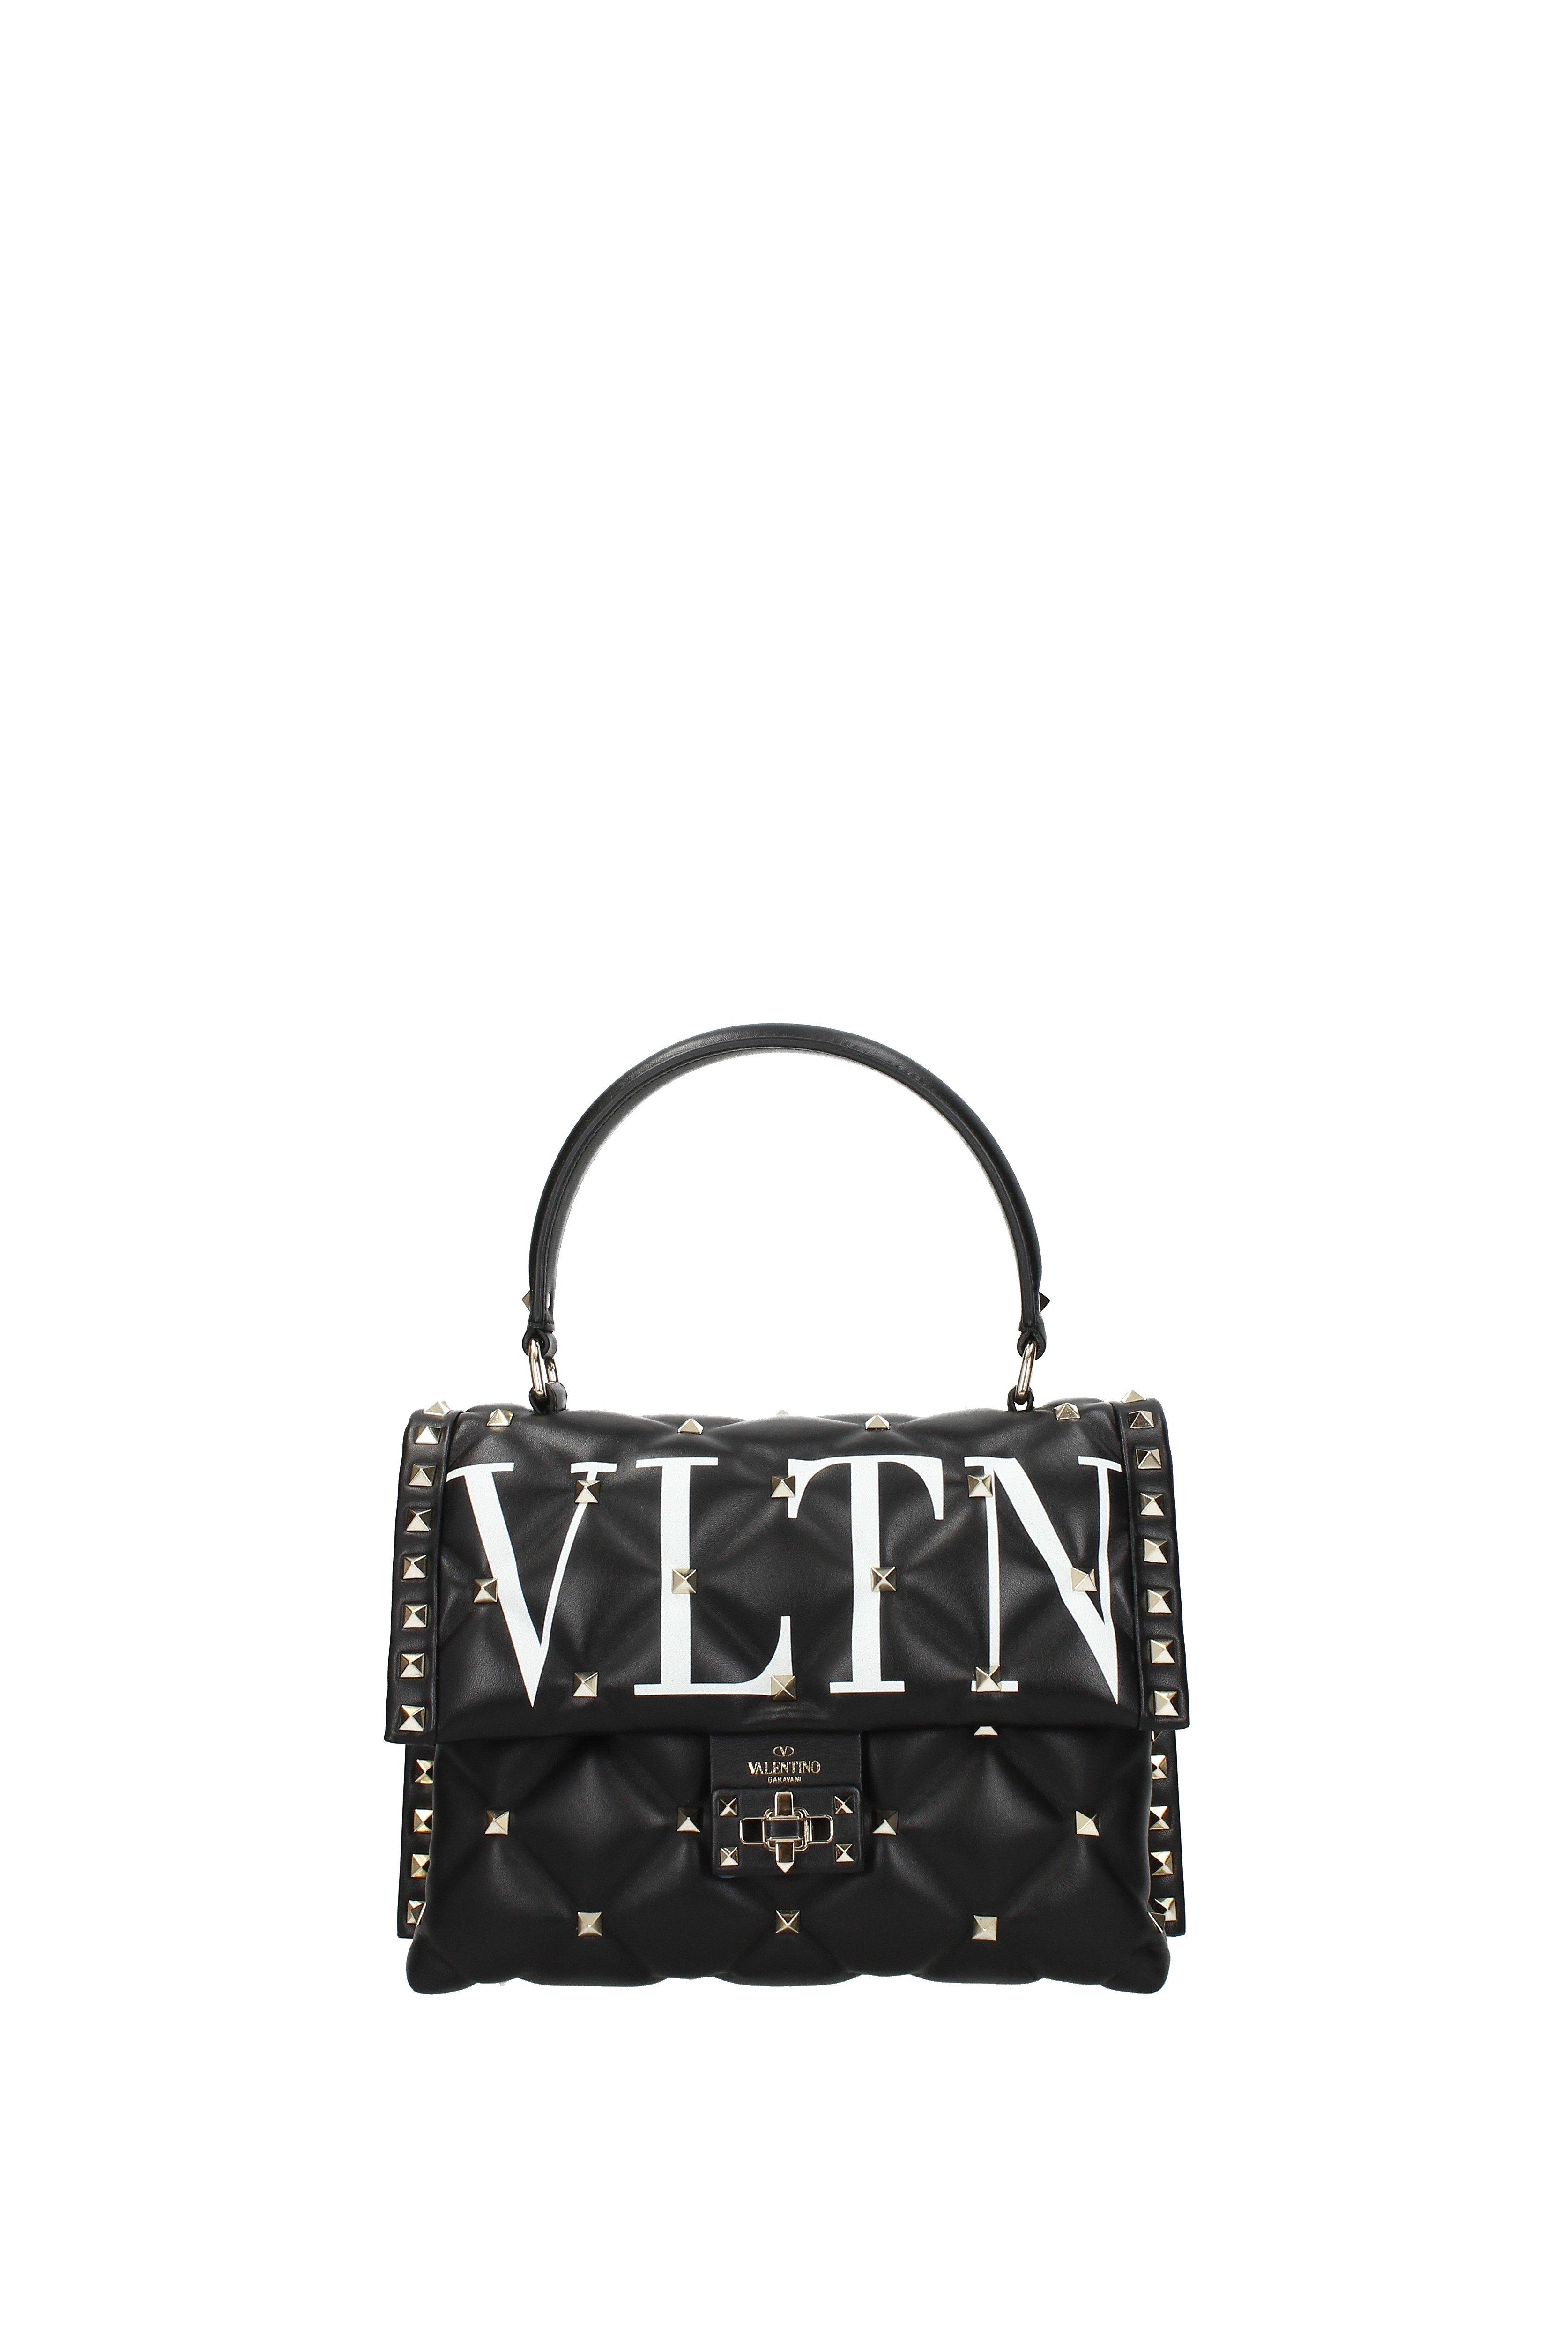 Valentino Bags For Women | IUCN Water